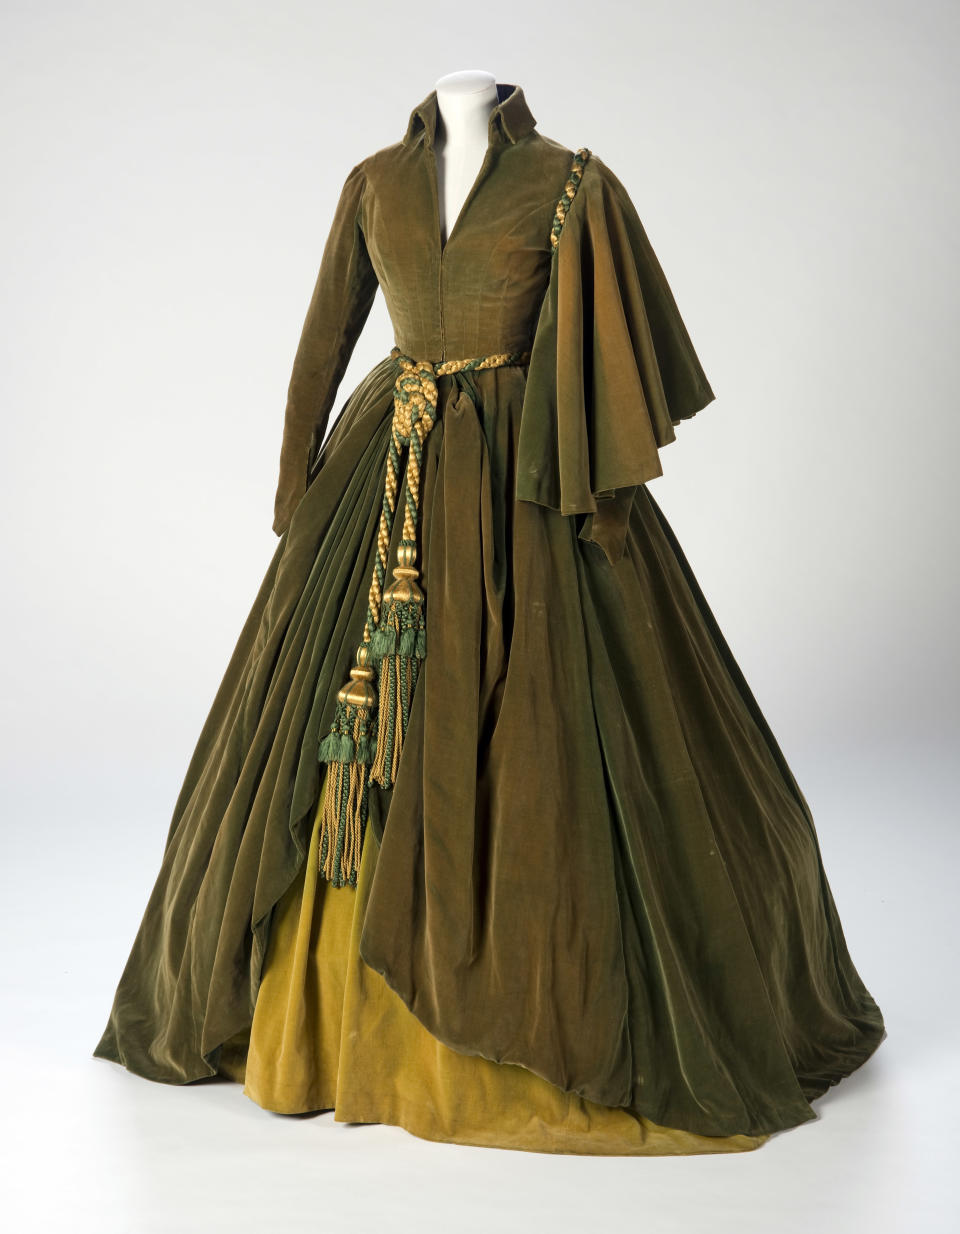 This undated photo provided by the Harry Ransom Center shows the conserved green curtain dress worn by Vivien Leigh as Scarlett O'Hara in "Gone With The Wind". The iconic dress and Scarlett's burgundy ball gown from the 1939 film were saved from deterioration by a $30,000 conservation effort by the Harry Ransom Center at the University of Texas, and are on display for the first time in nearly 30 years at London's Victoria and Albert Museum as part of a Hollywood costume exhibit. (AP Photo/Harry Ransom Center,Pete Smith)